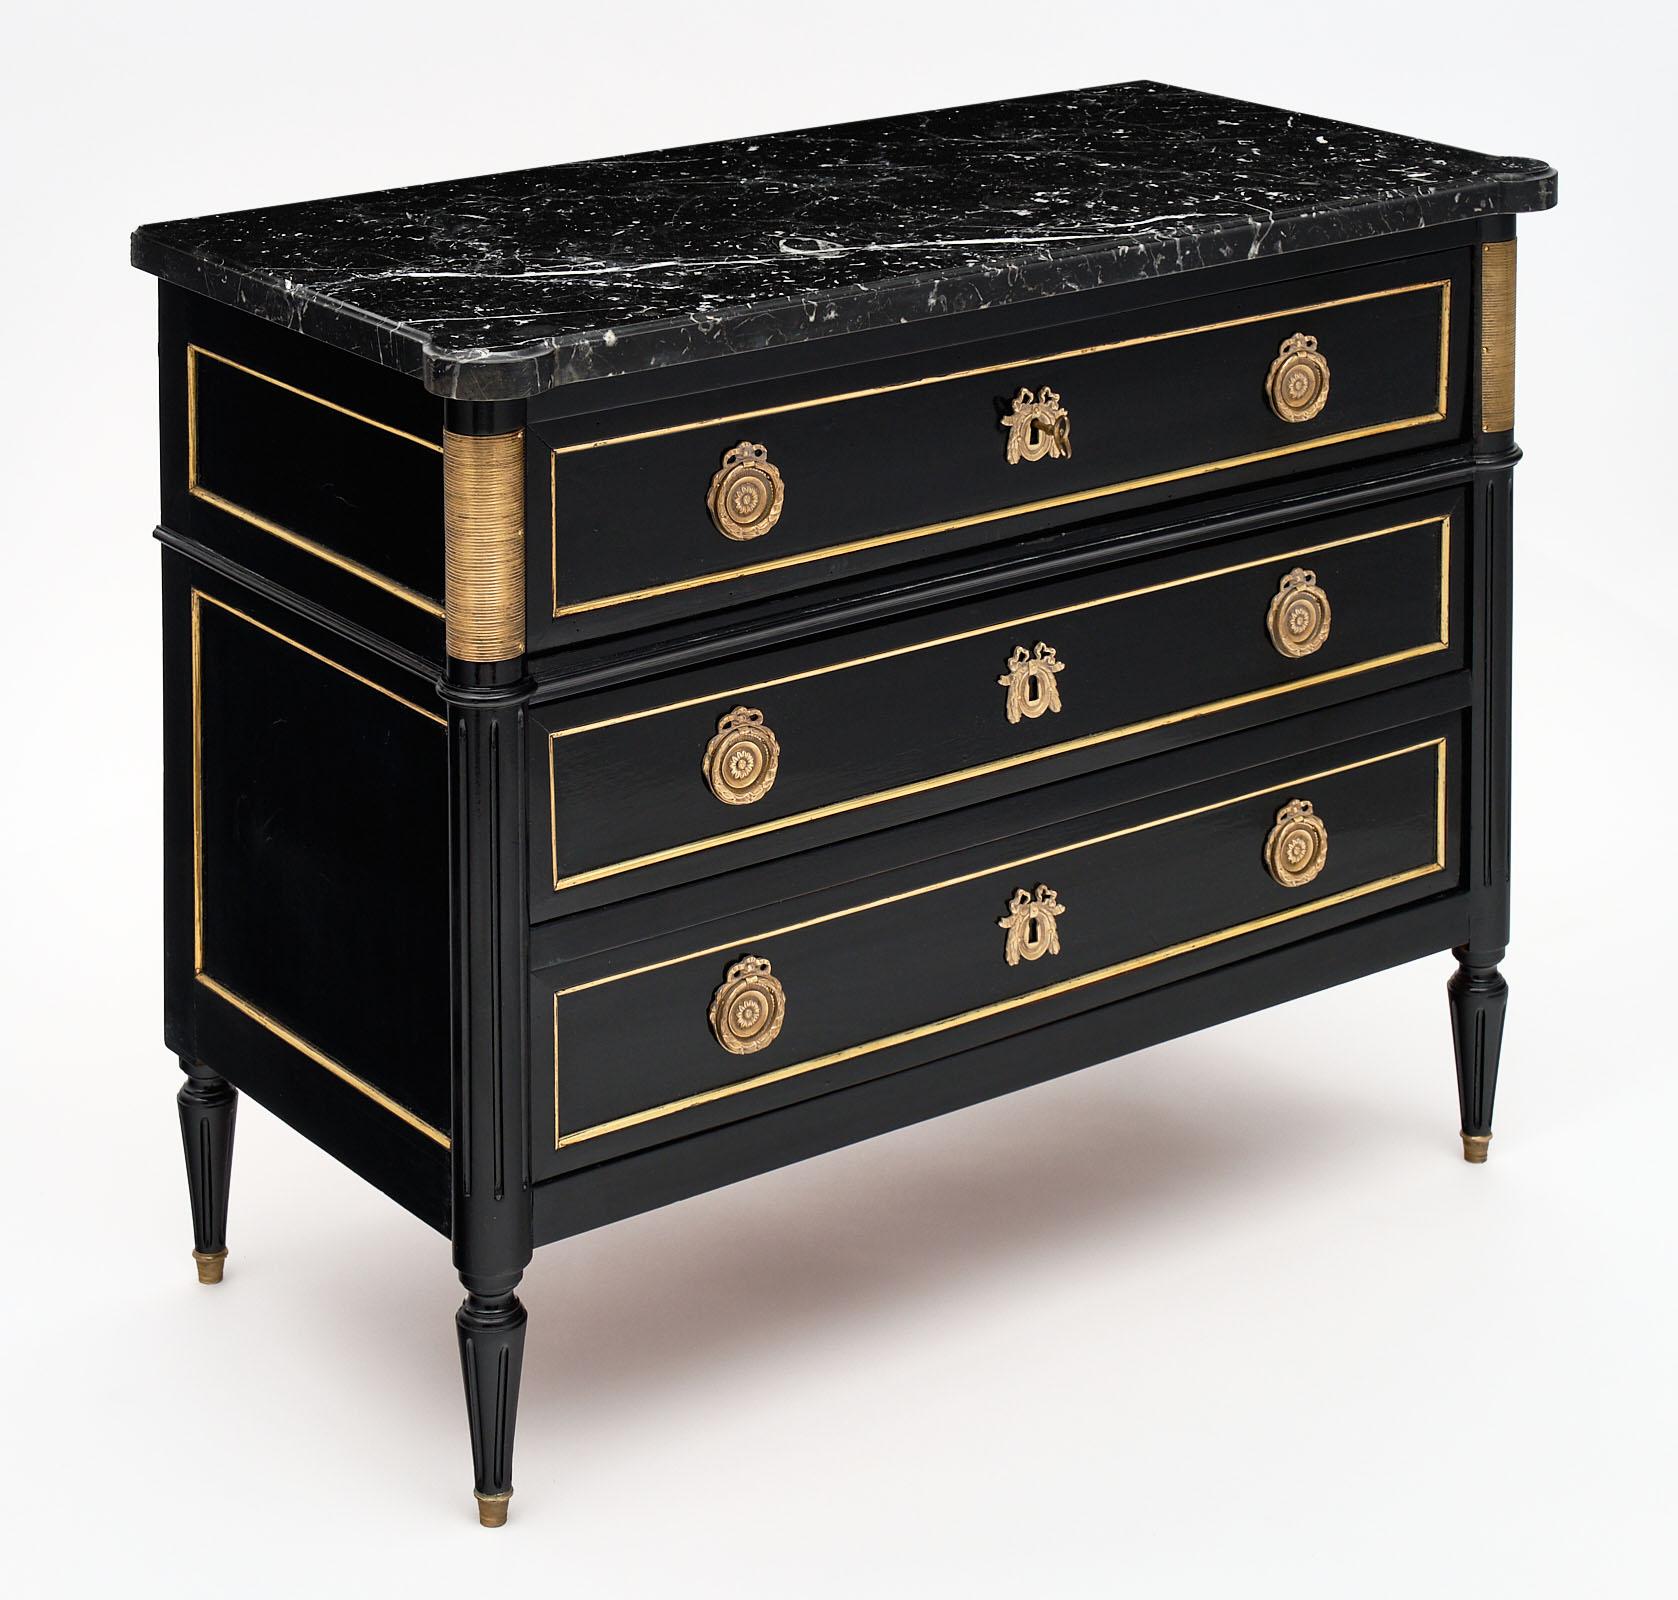 Louis XVI style French antique chest/secretary made of mahogany and finished with an ebony French polish. This commode has two dovetailed drawers and all original finely cast hardware and trim. The top panel folds down and slides out to feature a